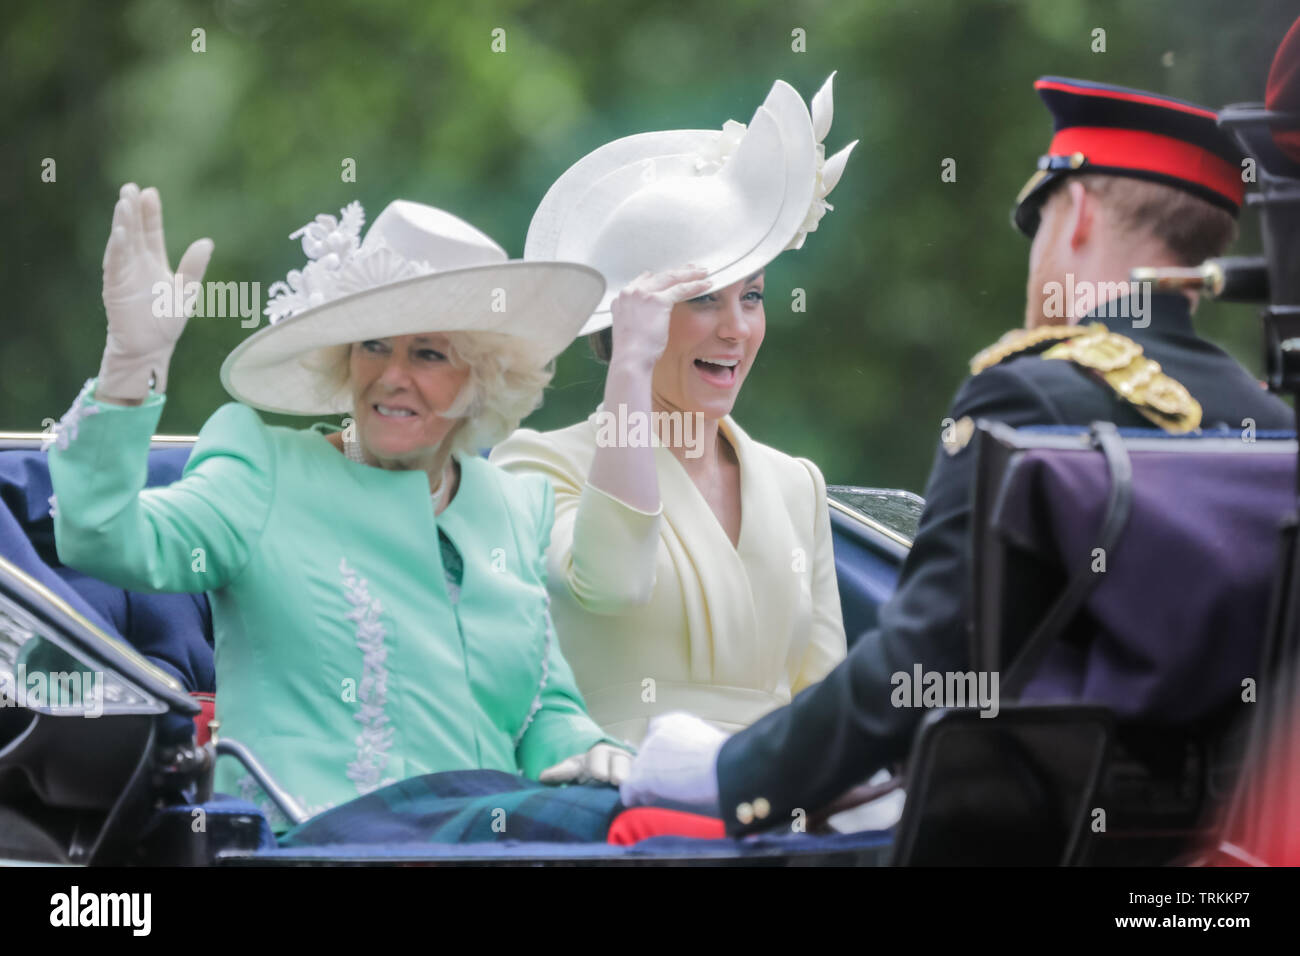 London, UK. 08th June, 2019. HRH Catherine, Duchess of Cambridge and HRH Camilla, Duchess of Cornwall, keep hold of their hats while sharing an open top carriage along The Mall on a windy day. Trooping the Colour, The Queen's Birthday Parade, London UK Credit: amanda rose/Alamy Live News Credit: amanda rose/Alamy Live News Stock Photo